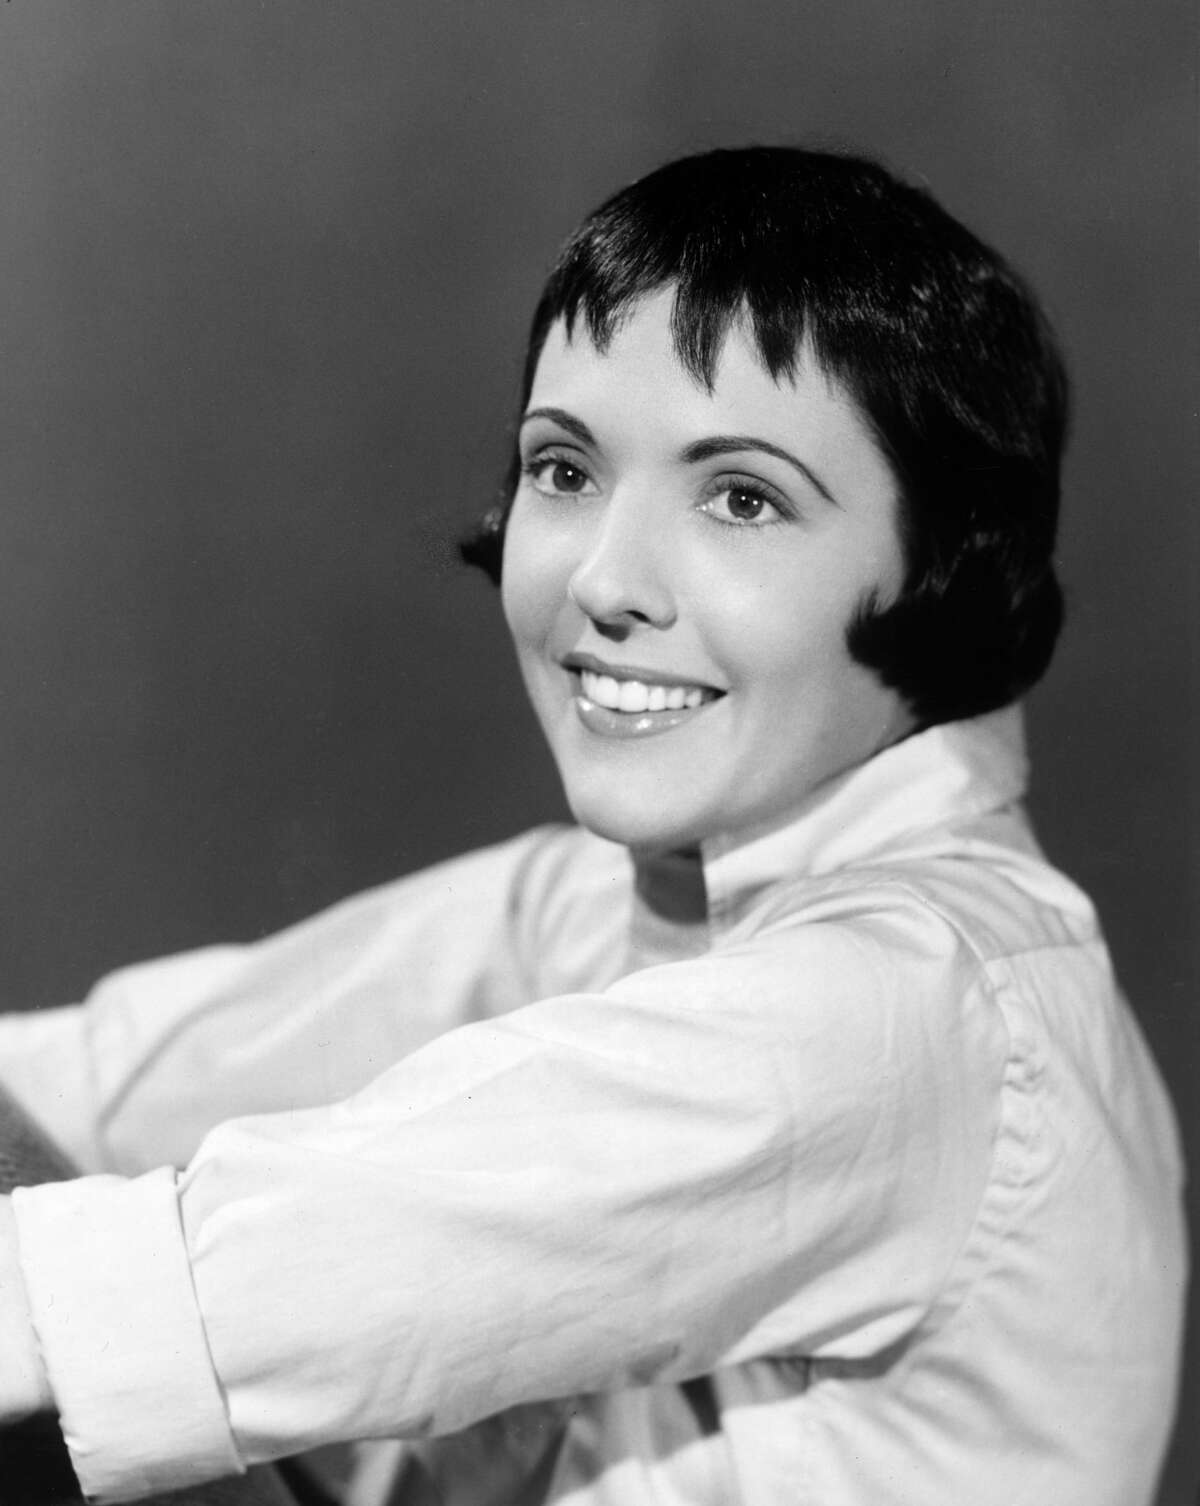 circa 1955: Studio headshot portrait of American singer Keely Smith smiling in an oxford shirt.